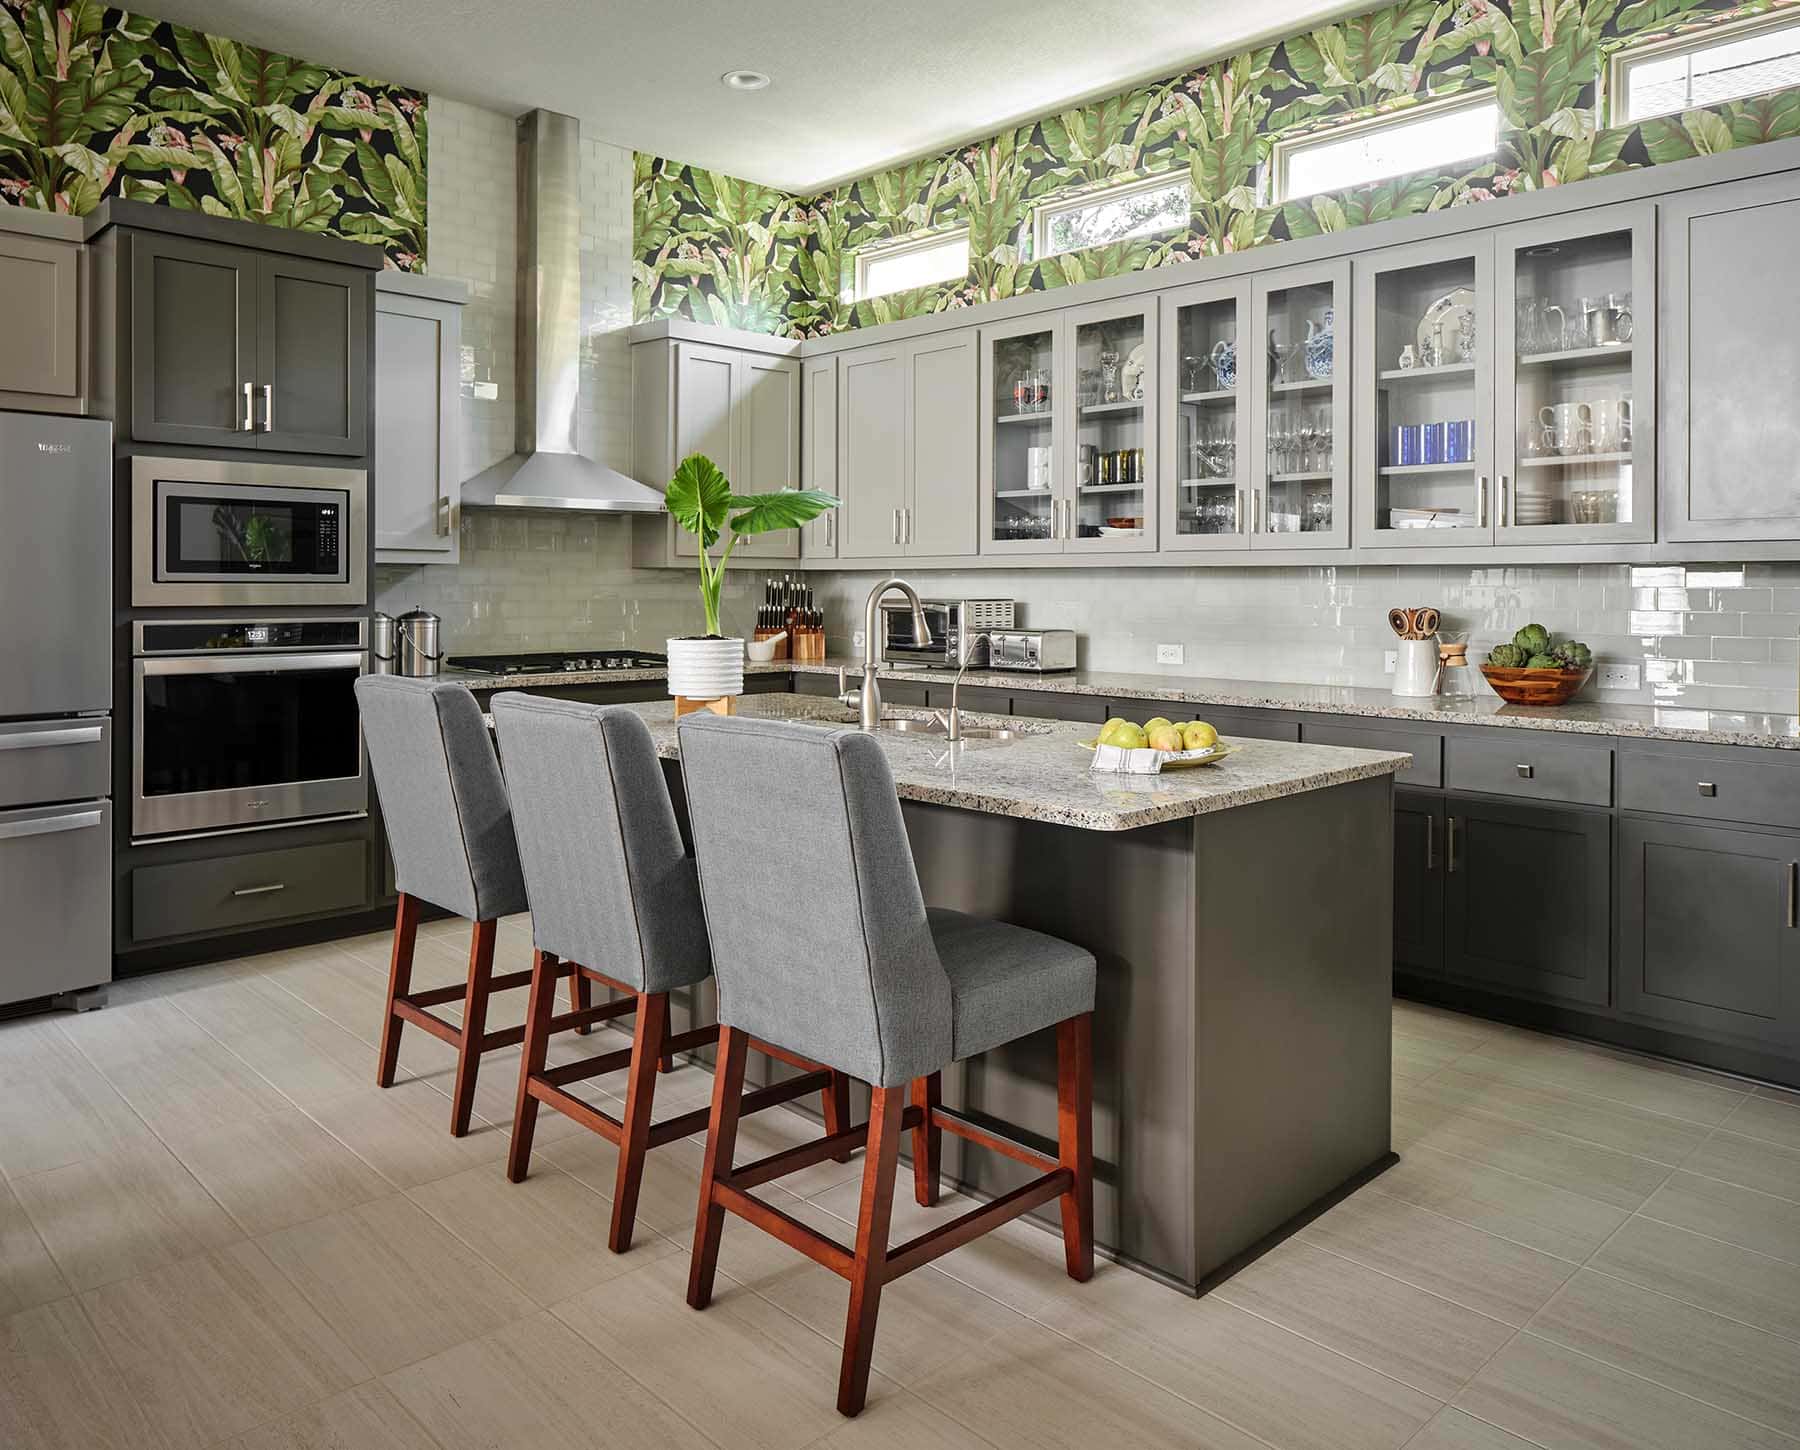 Banana Leaf Wallpaper in a Contemporary Kitchen - Paper Moon